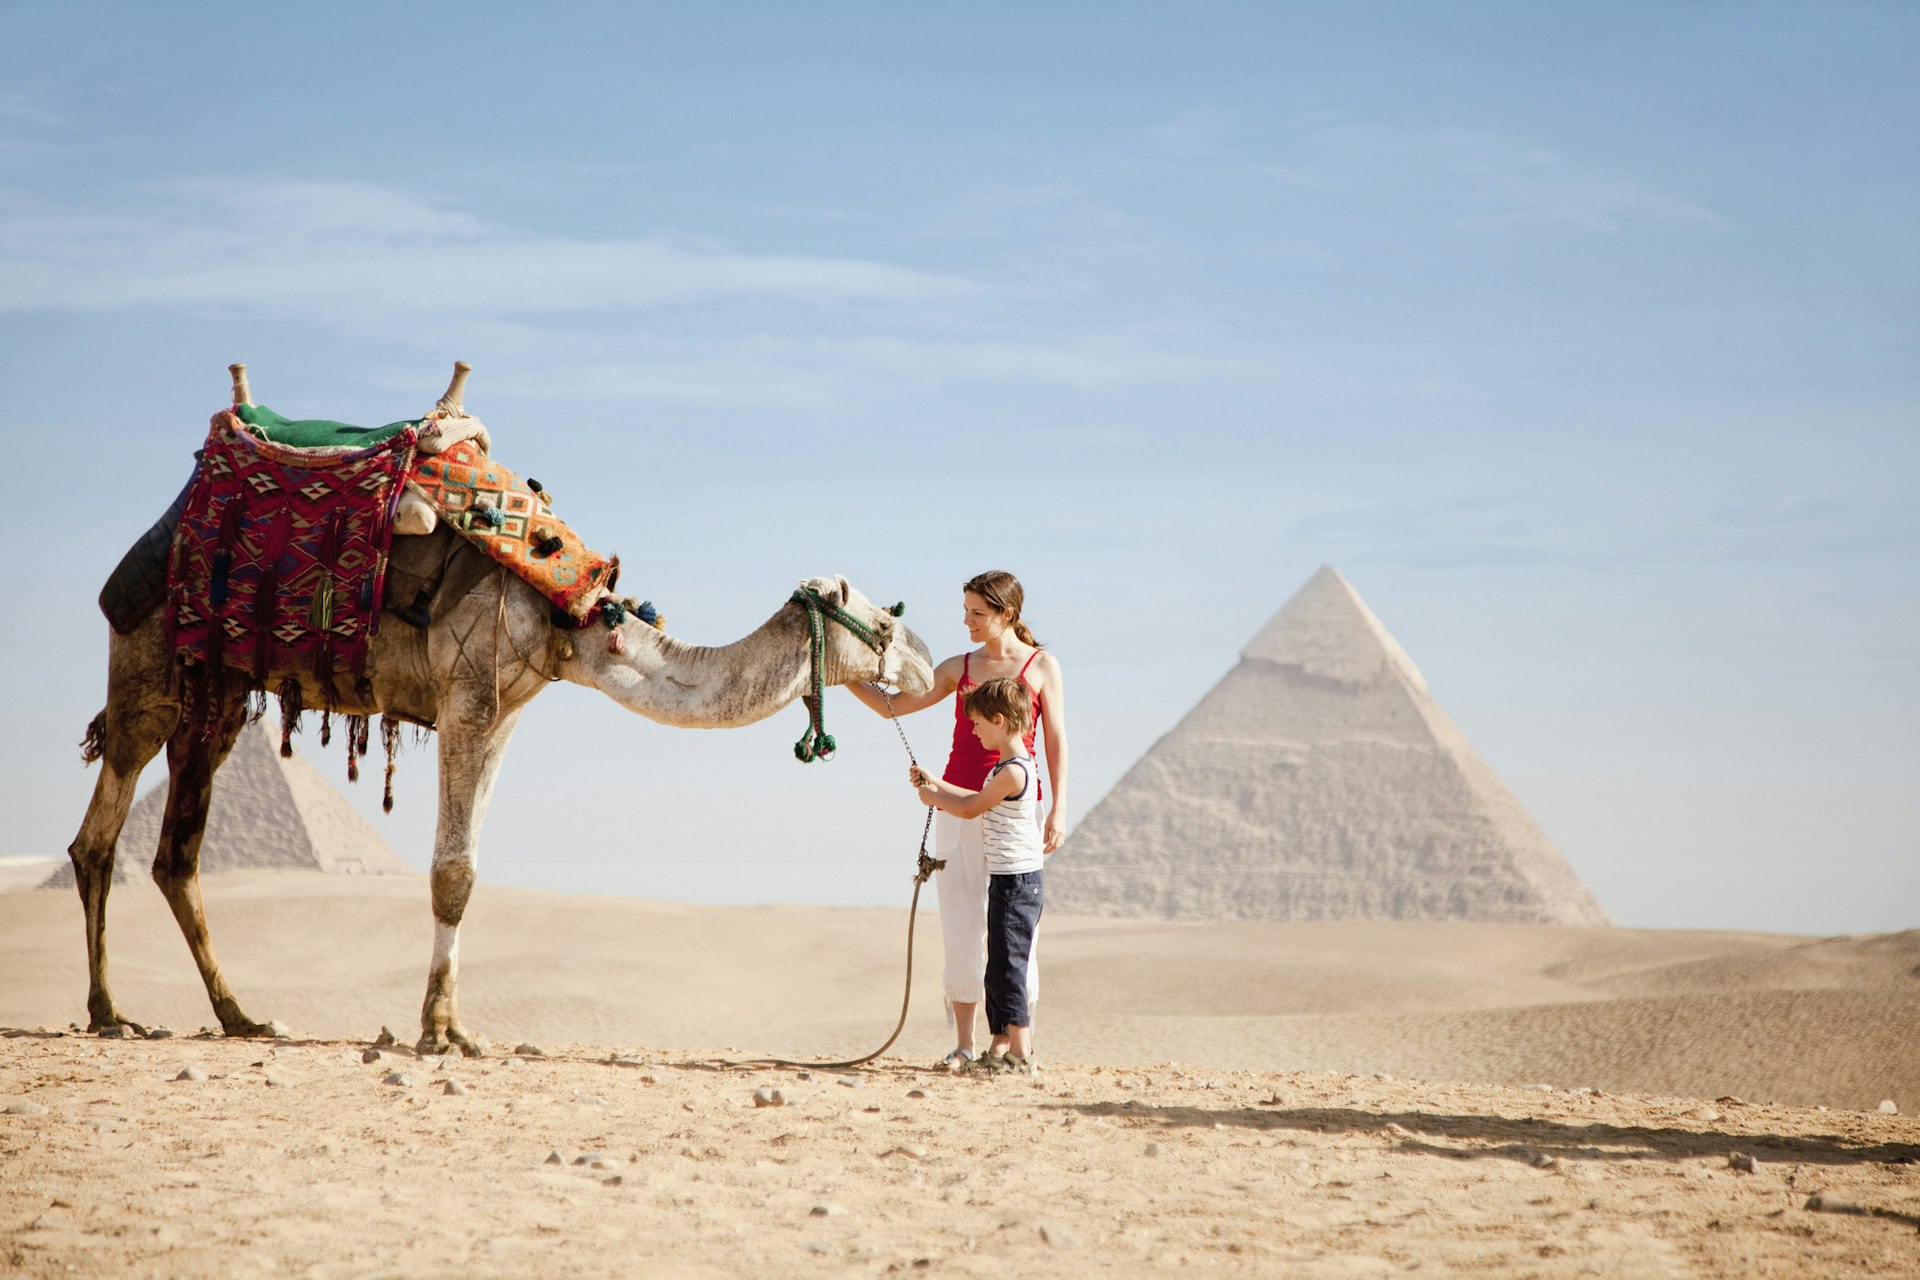  Mother and son with a camel at the Pyramids of Giza, Egypt 